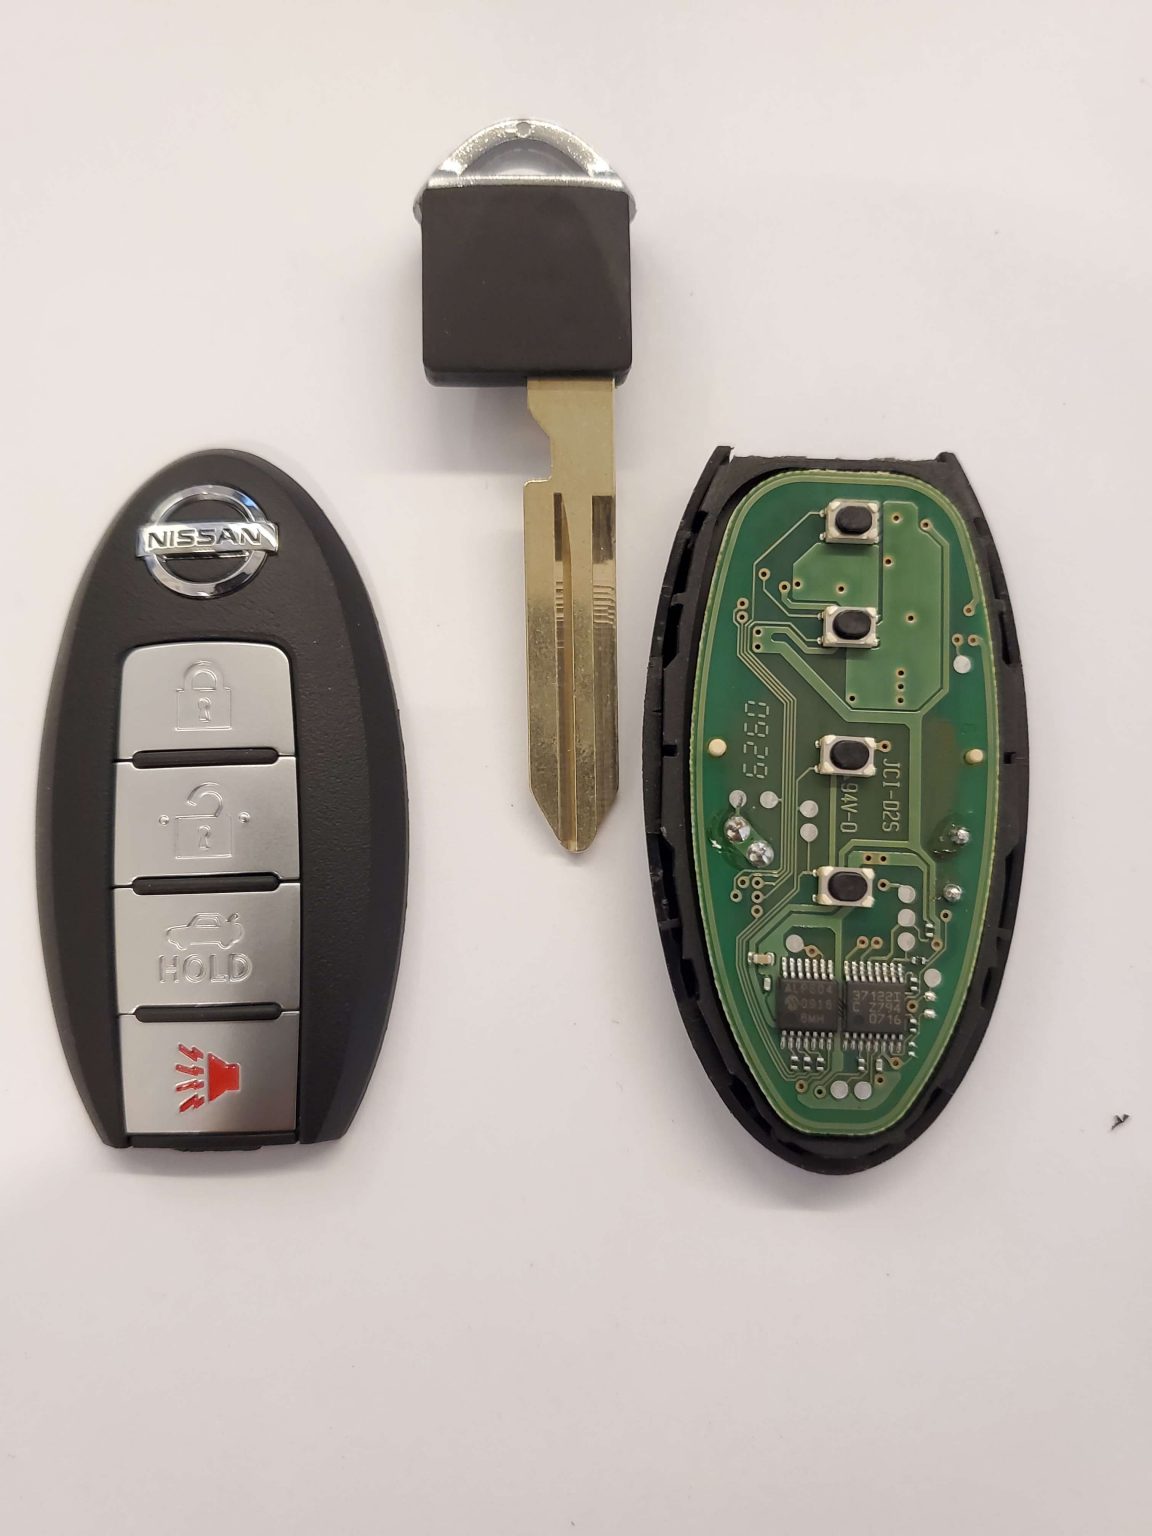 Nissan Sentra Key Replacement What To Do, Options, Costs & More